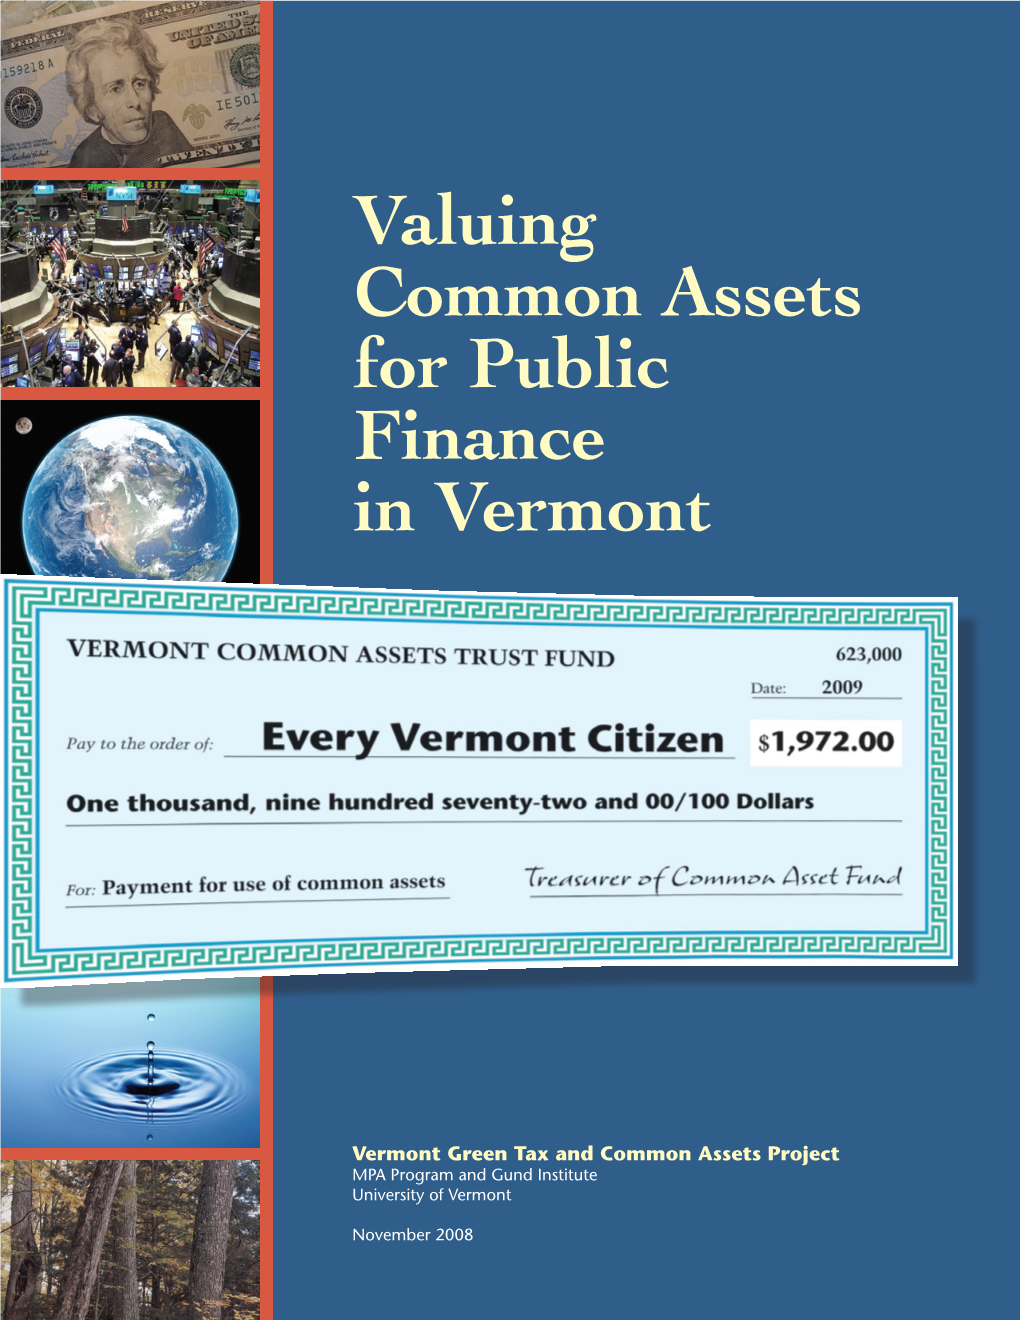 Valuing Common Assets for Public Finance in Vermont